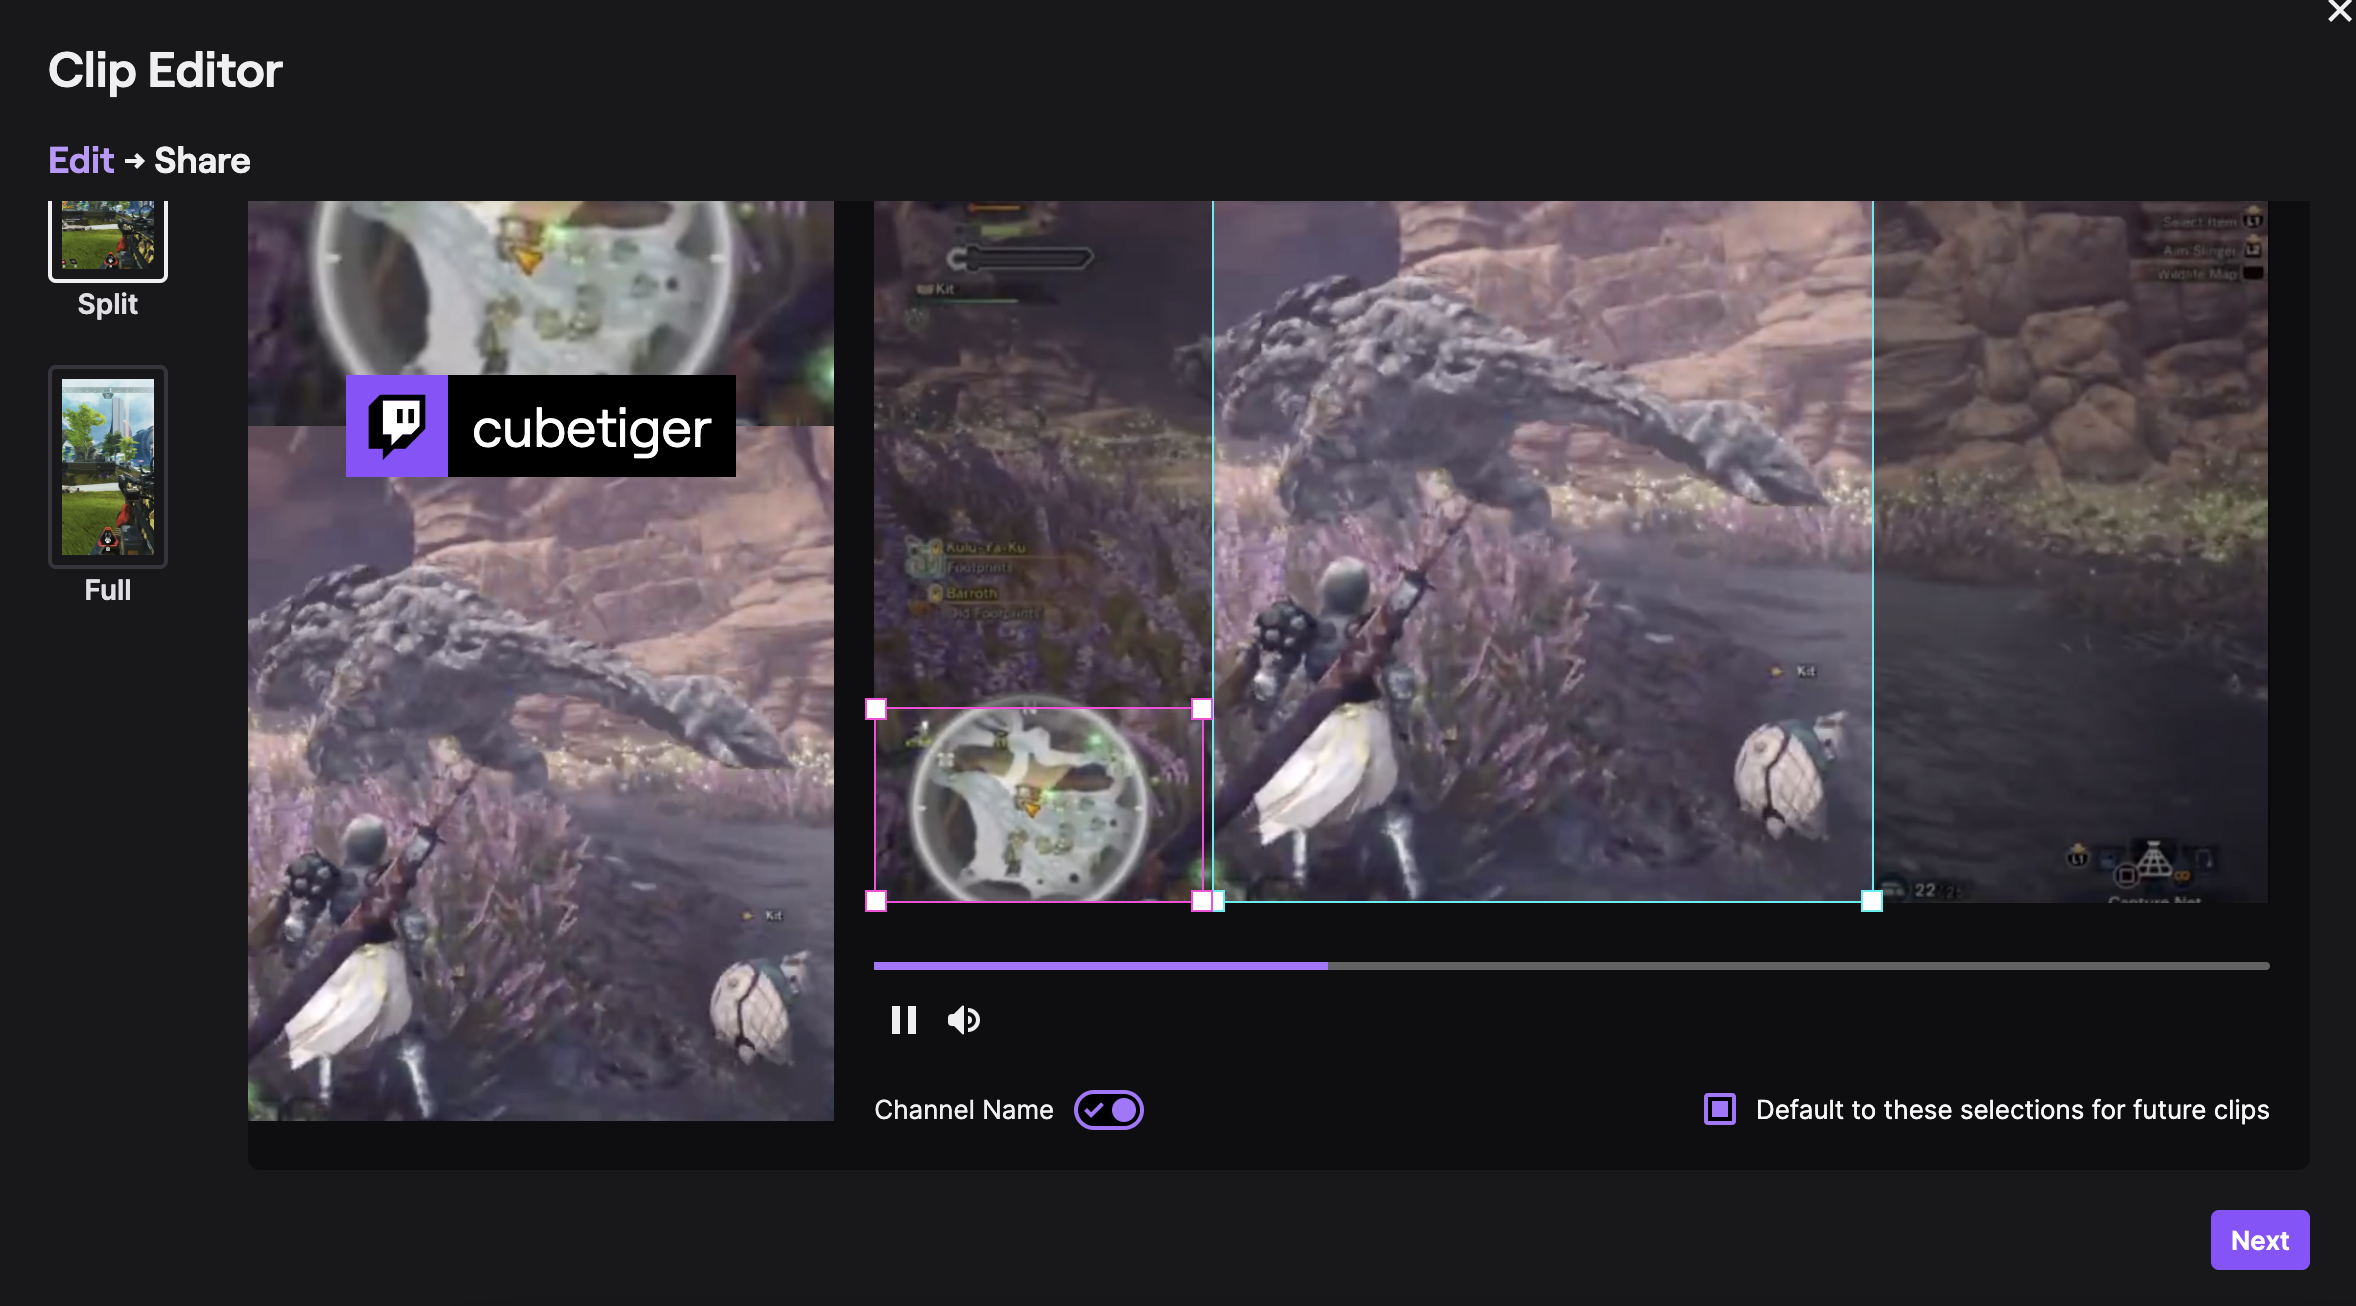 Twitch clip editor for vertical short form video clips